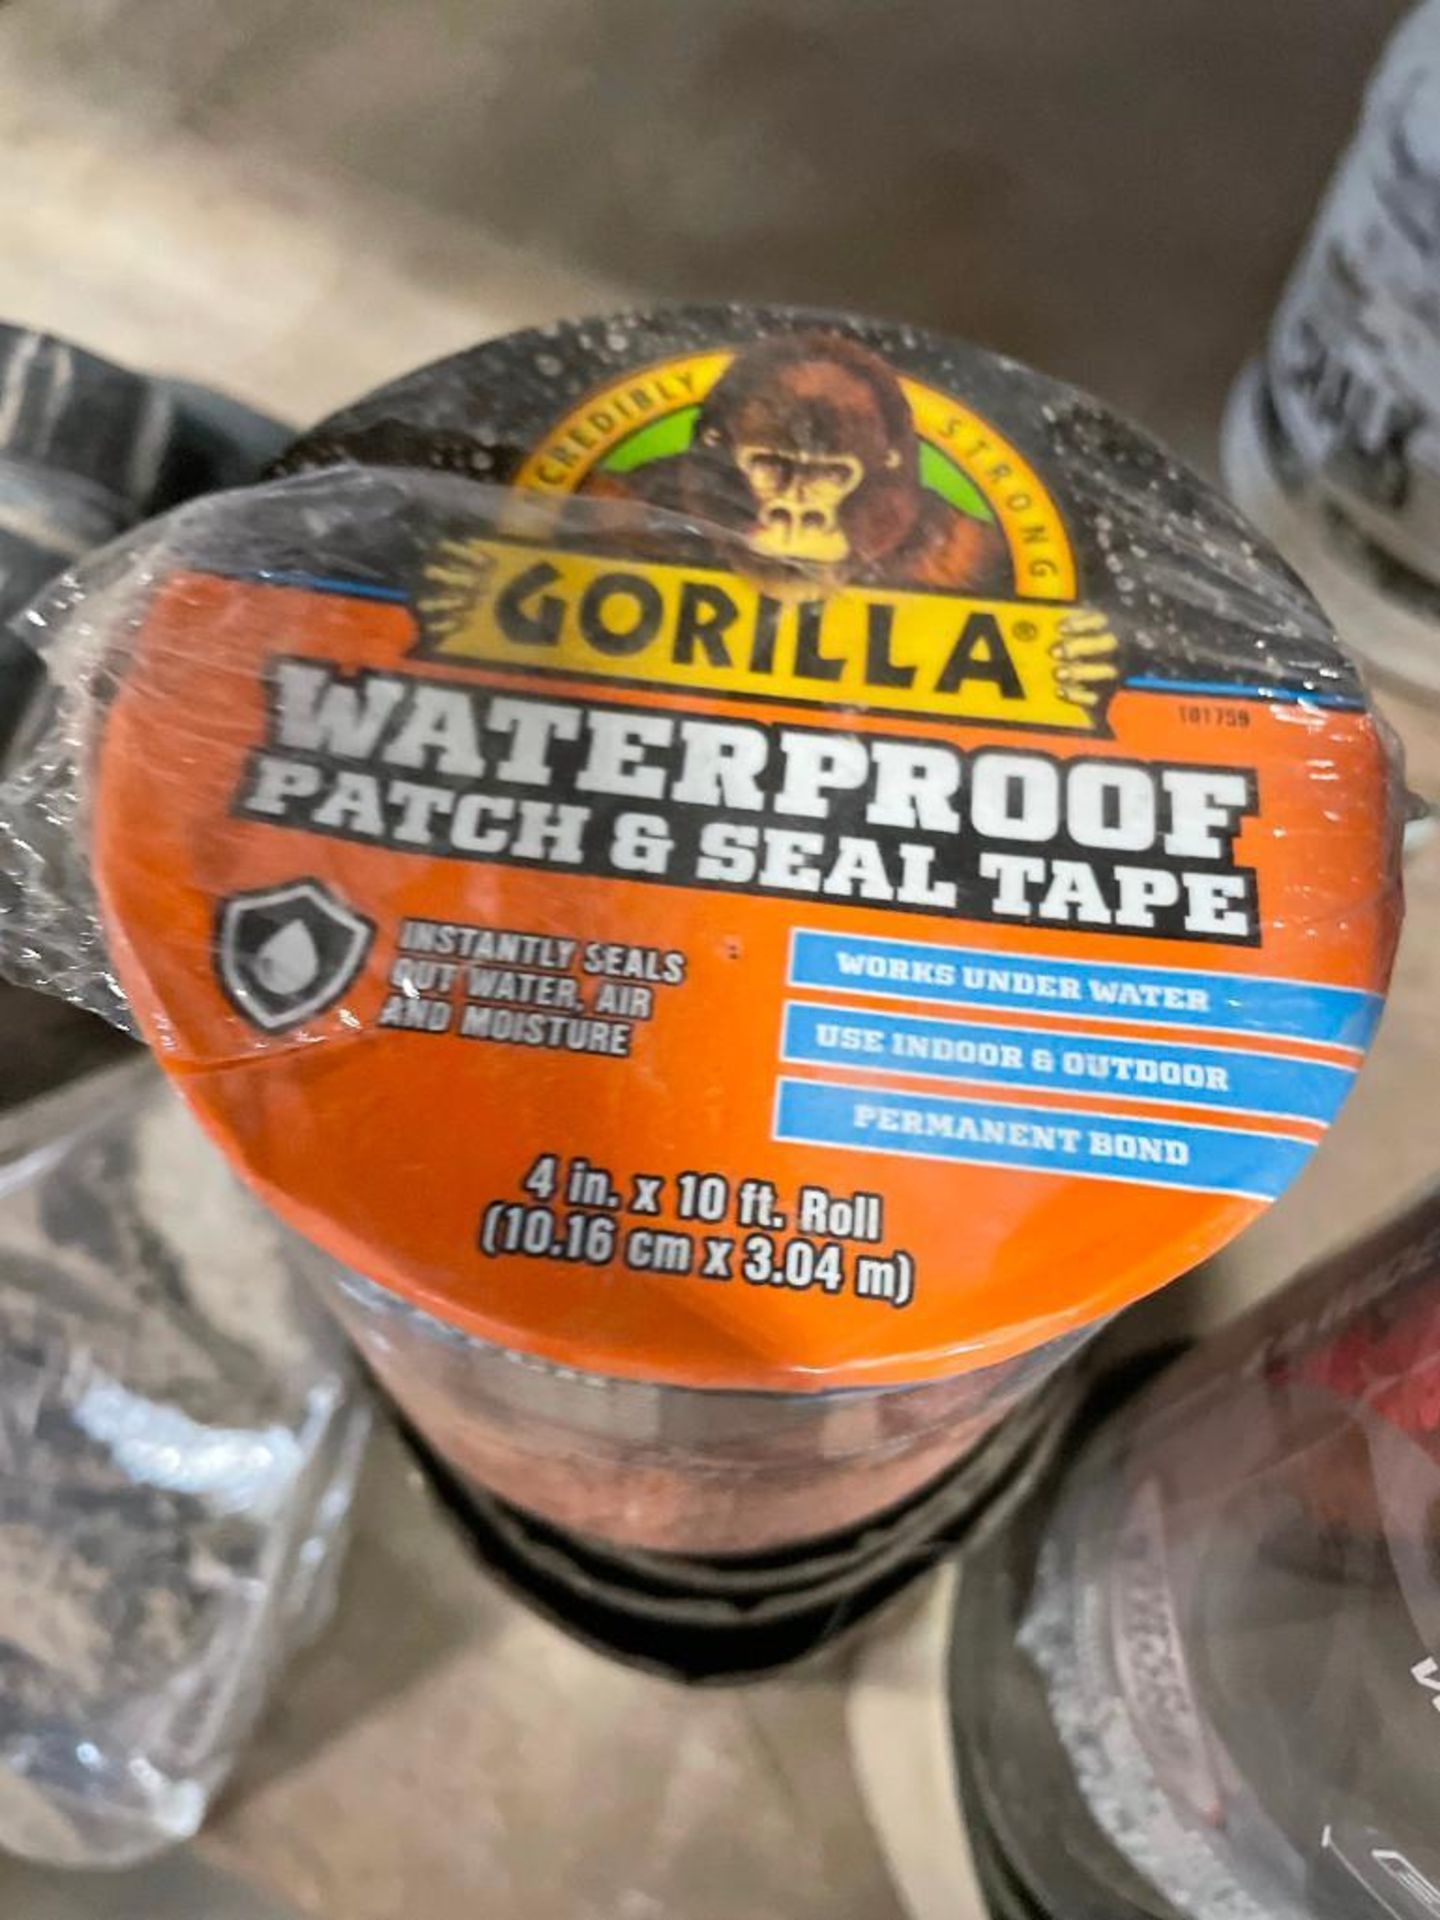 Flex Tape, Gorilla Waterproof Patch & Seal Tape & Miscellaneous Tape. Located in Hazelwood, MO - Image 4 of 4